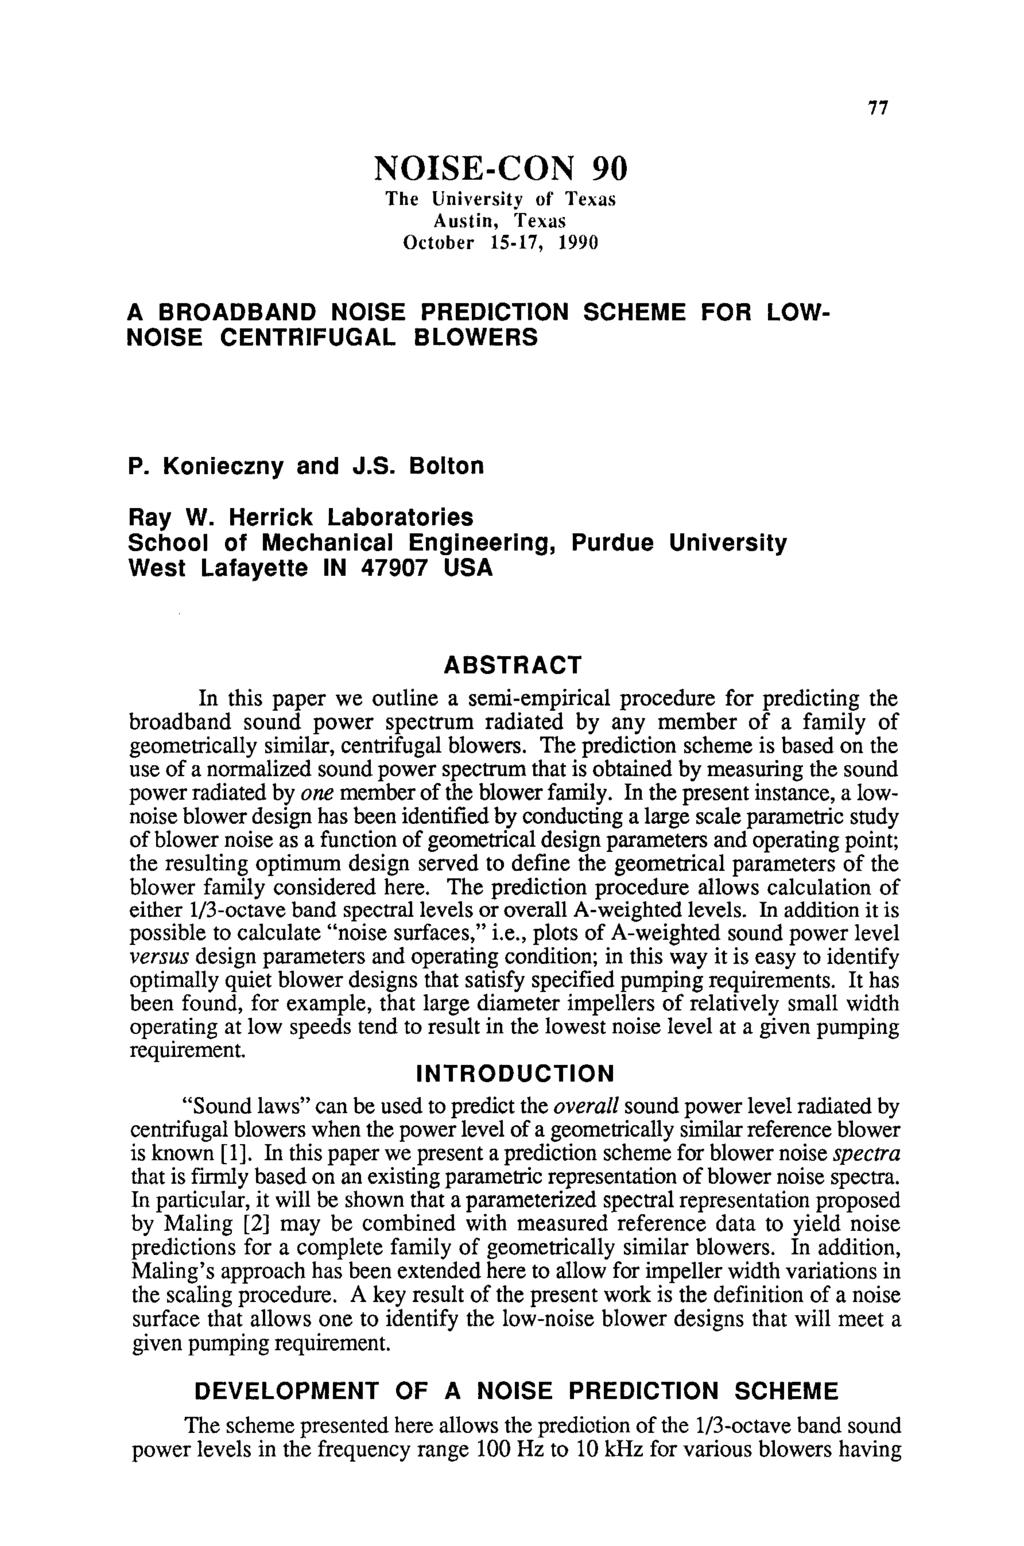 77 NOISE-CON 90 The University of' Texas Austin, Texas October 15-17, 1990 A BROADBAND NOISE PREDICTION SCHEME FOR LOW NOISE CENTRIFUGAL BLOWERS P. Konieczny and J.S. Bolton Ray W.